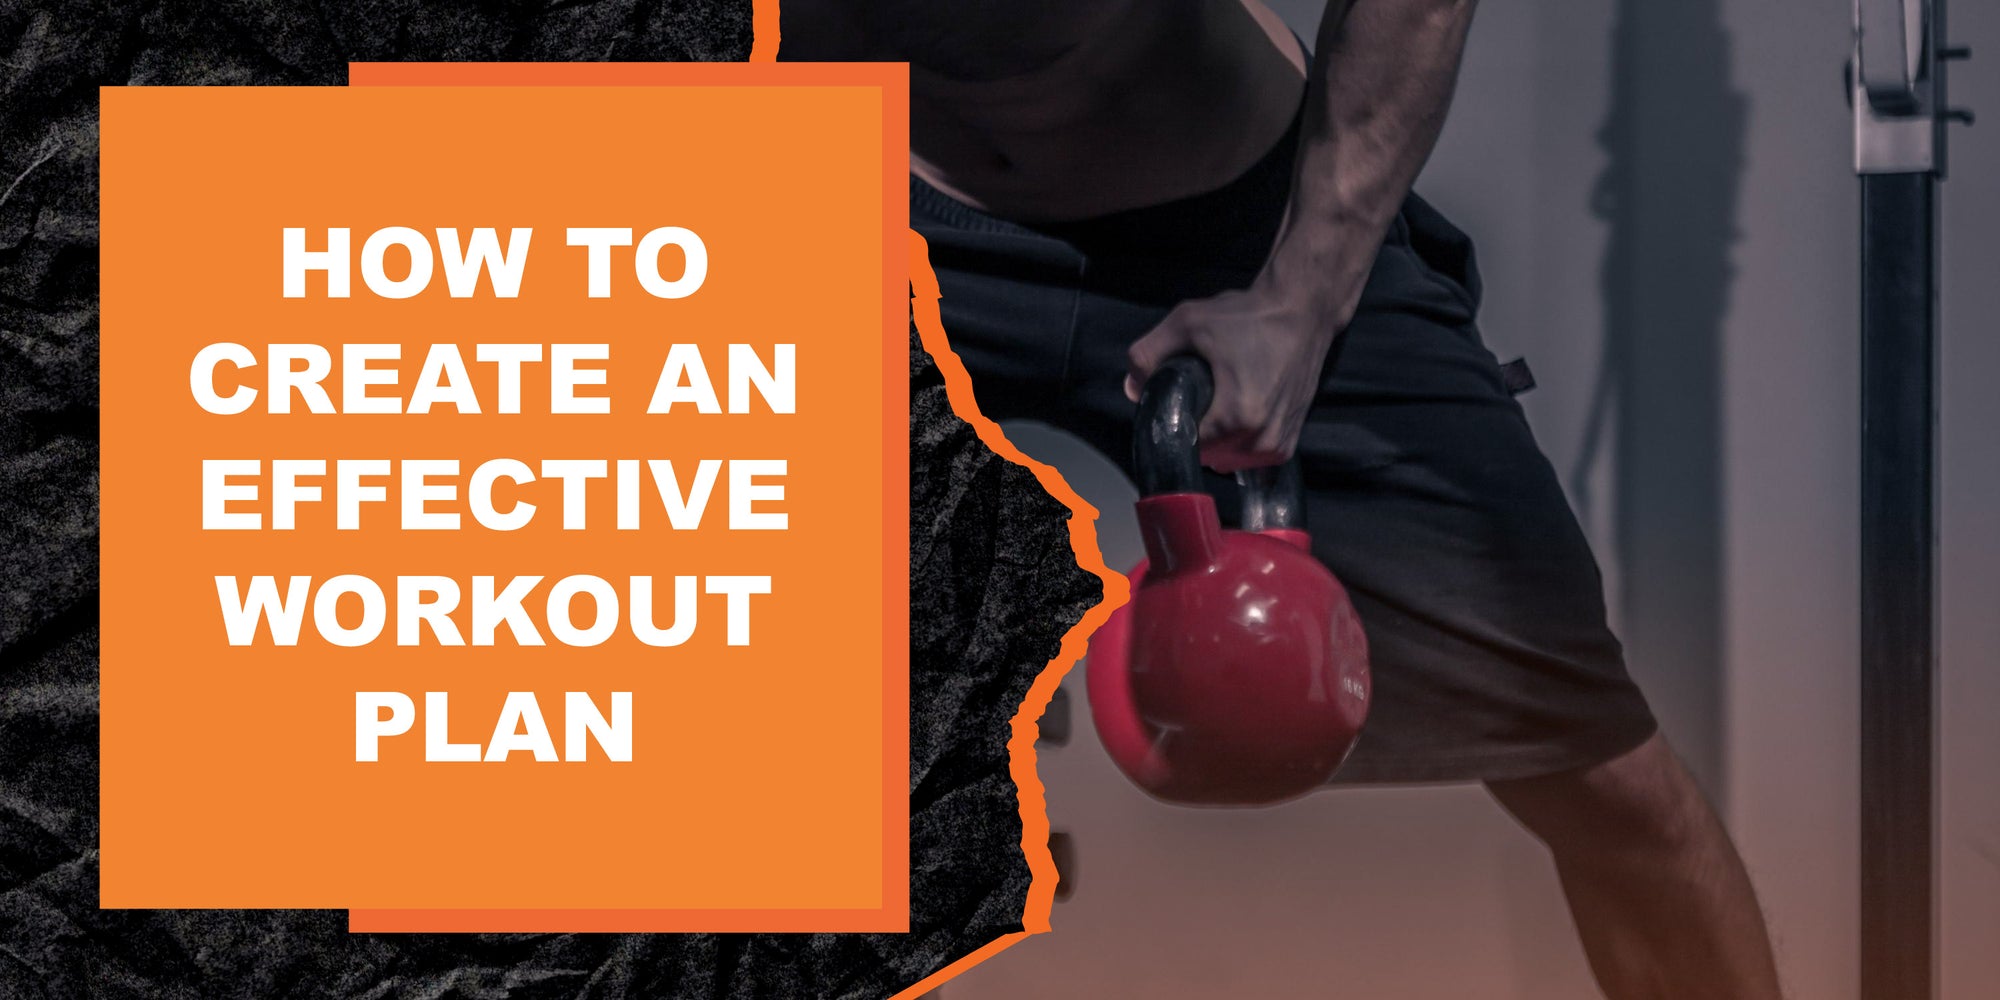 How to Create an Effective Workout Plan